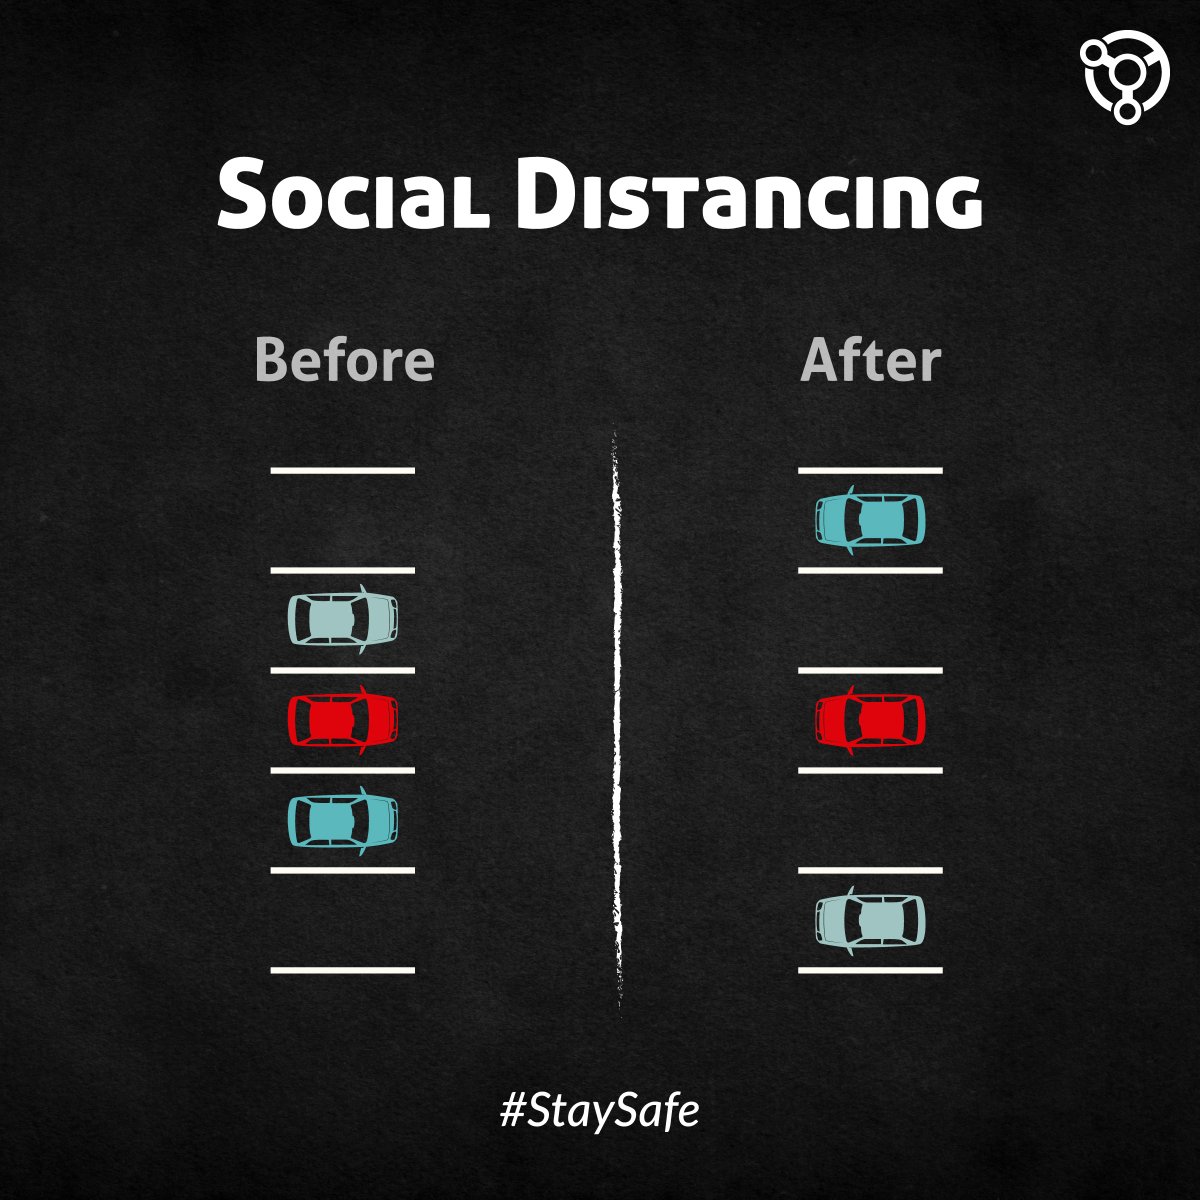 The only way we're going to get through this. Stay safe, everyone. #socialdistancing #stayhome #staysafe #stayhealthy